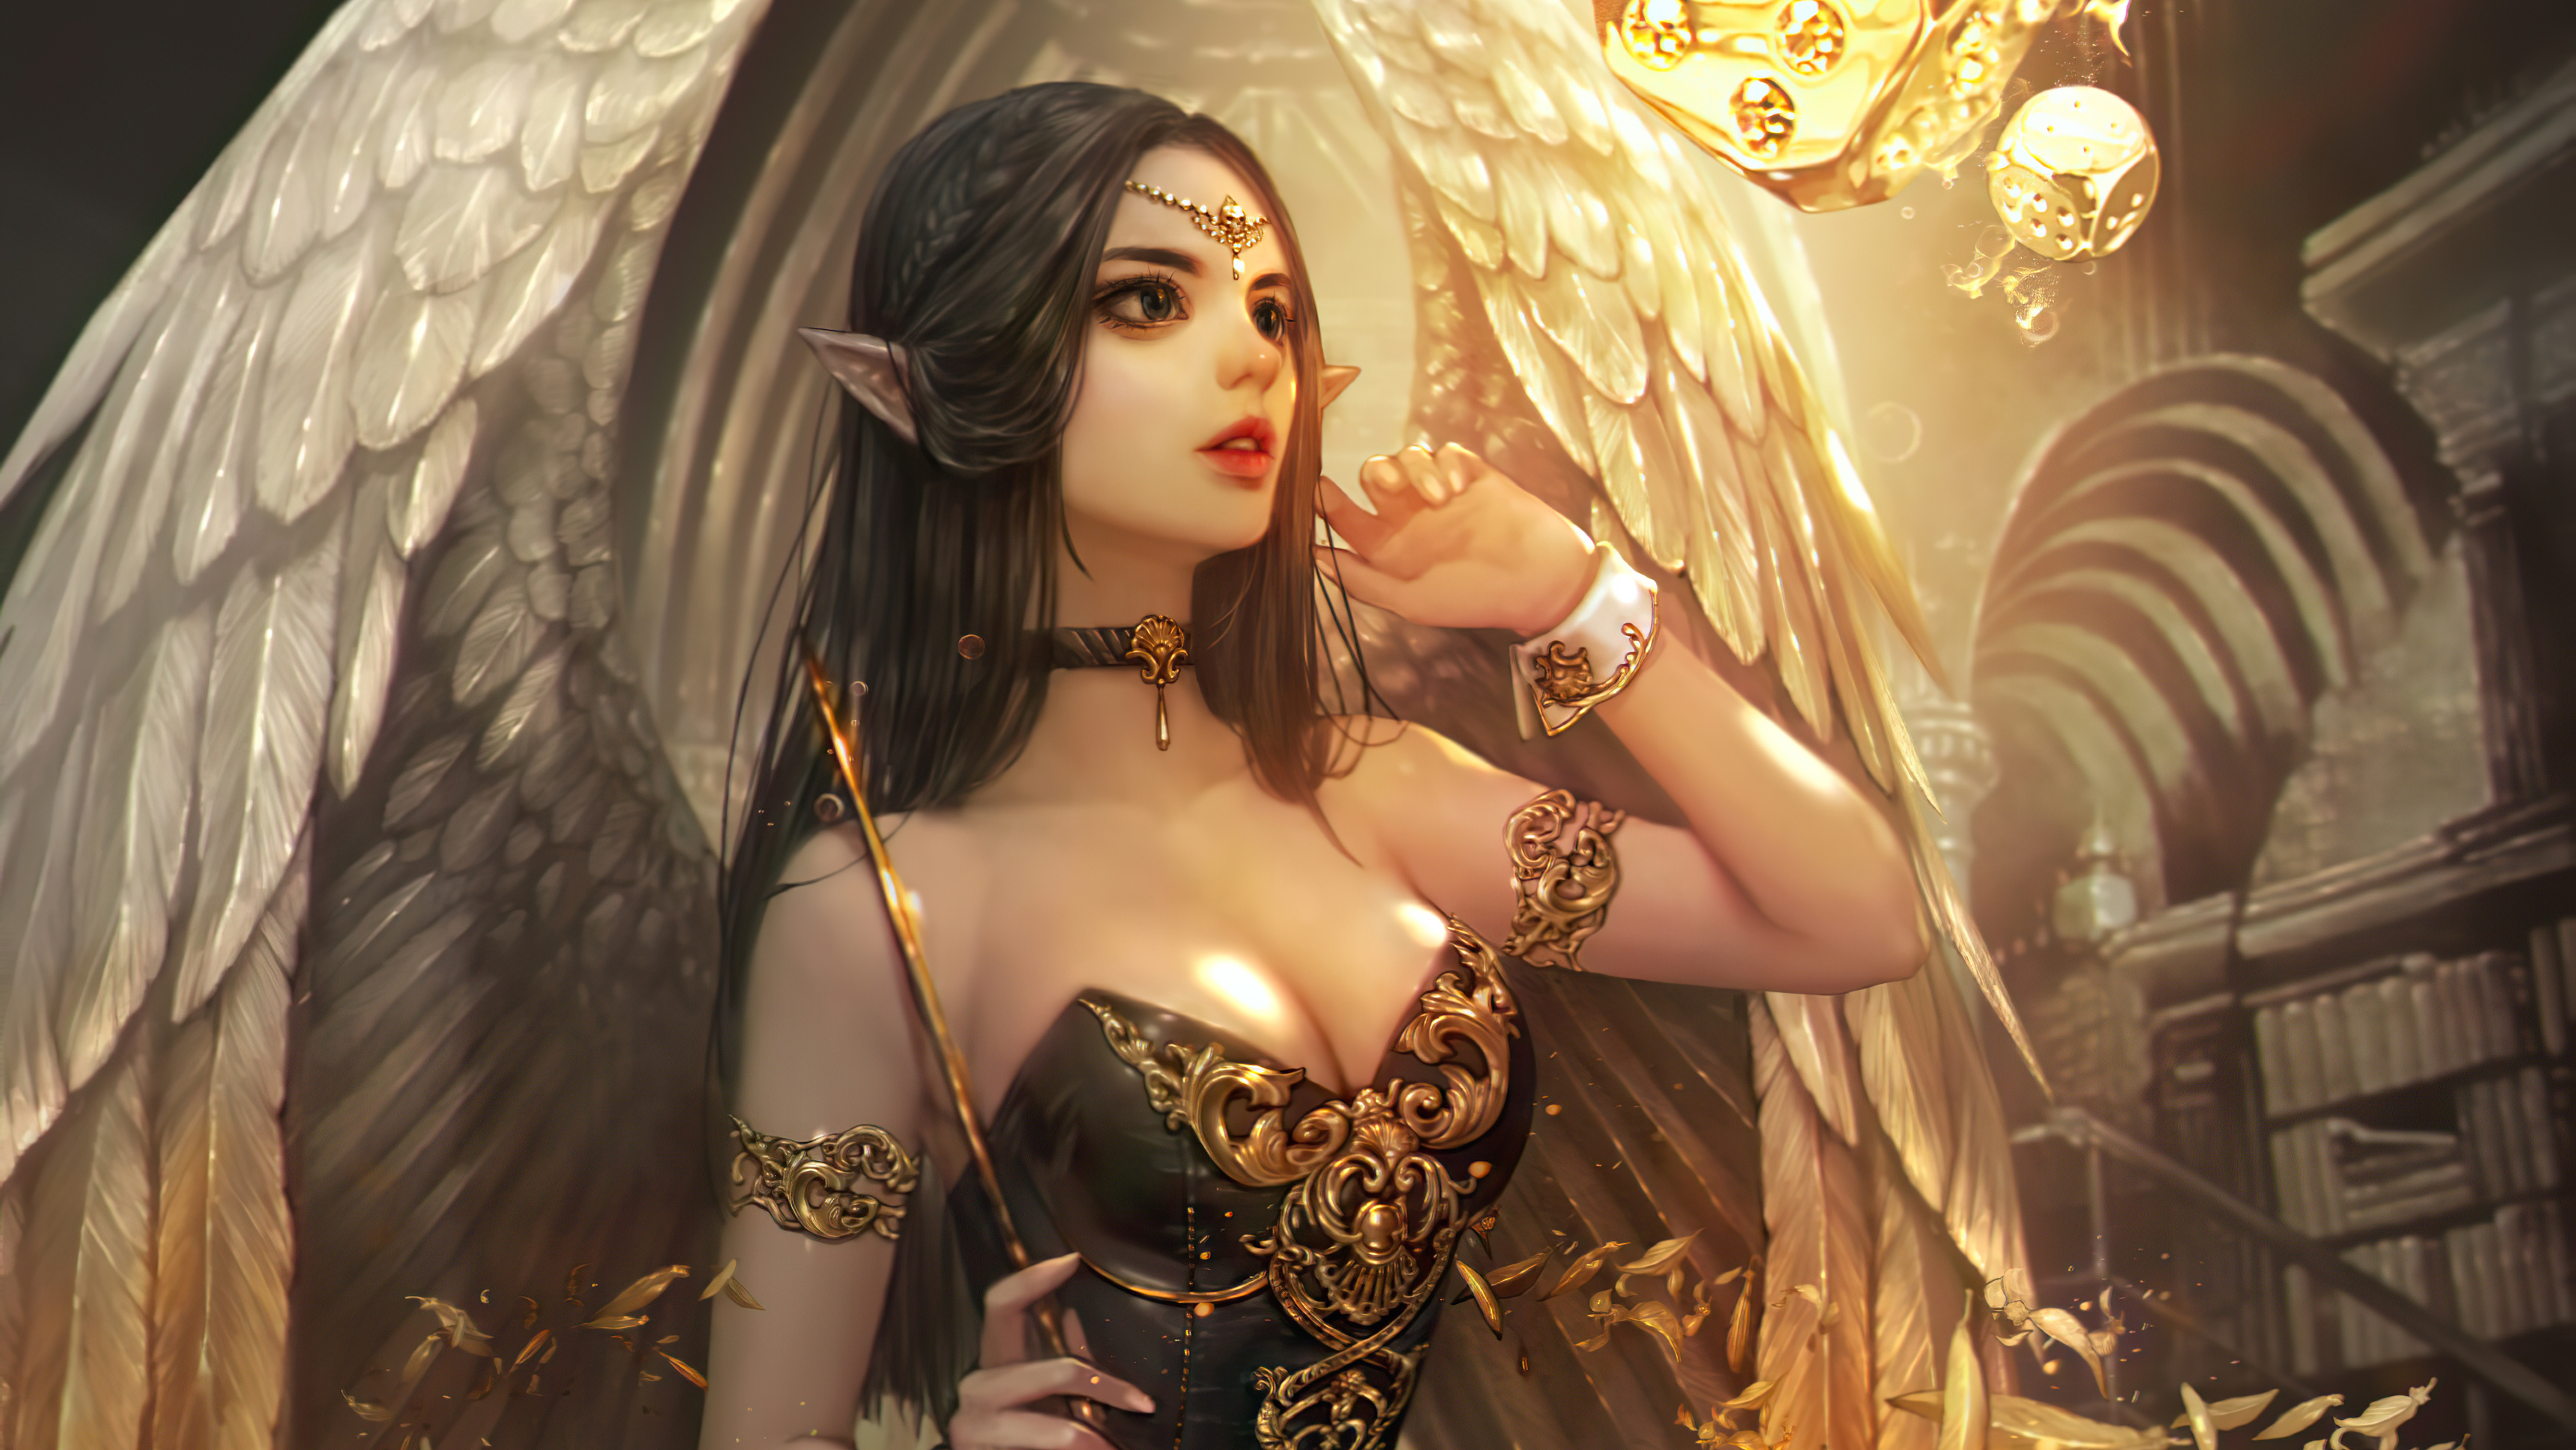 Beautiful Elf With Wings, HD Artist, 4k Wallpapers, Images, Backgrounds,  Photos and Pictures